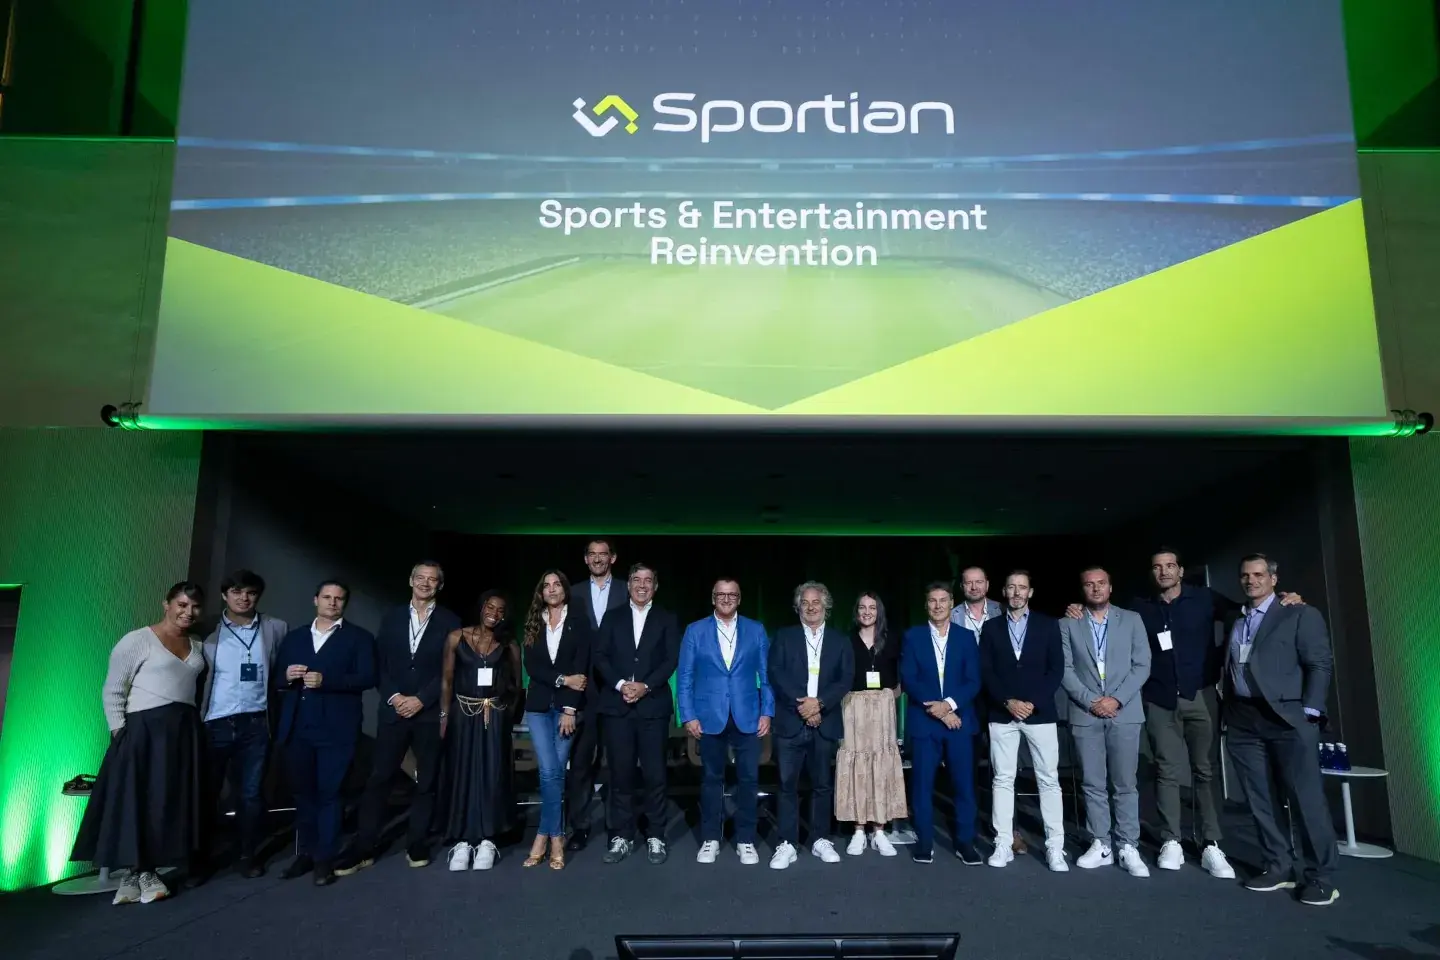 Globant and LALIGA Introduce Sportian, a Global Technology Company Reinventing the Sports and Entertainment Industry